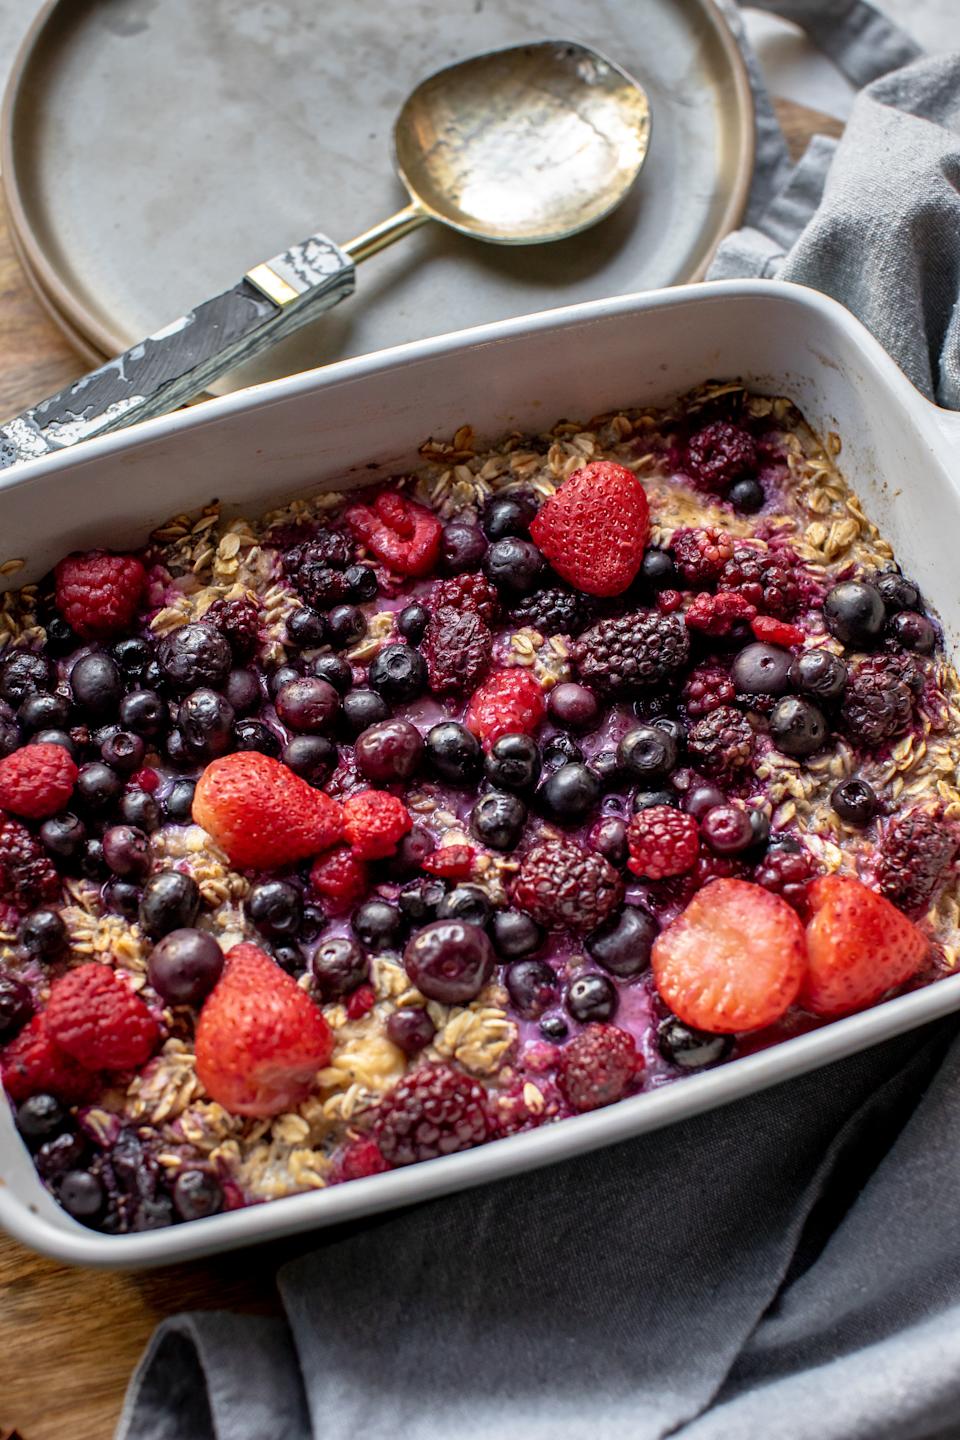 New Food Trend On TikTok, Baked Berry Oatmeal